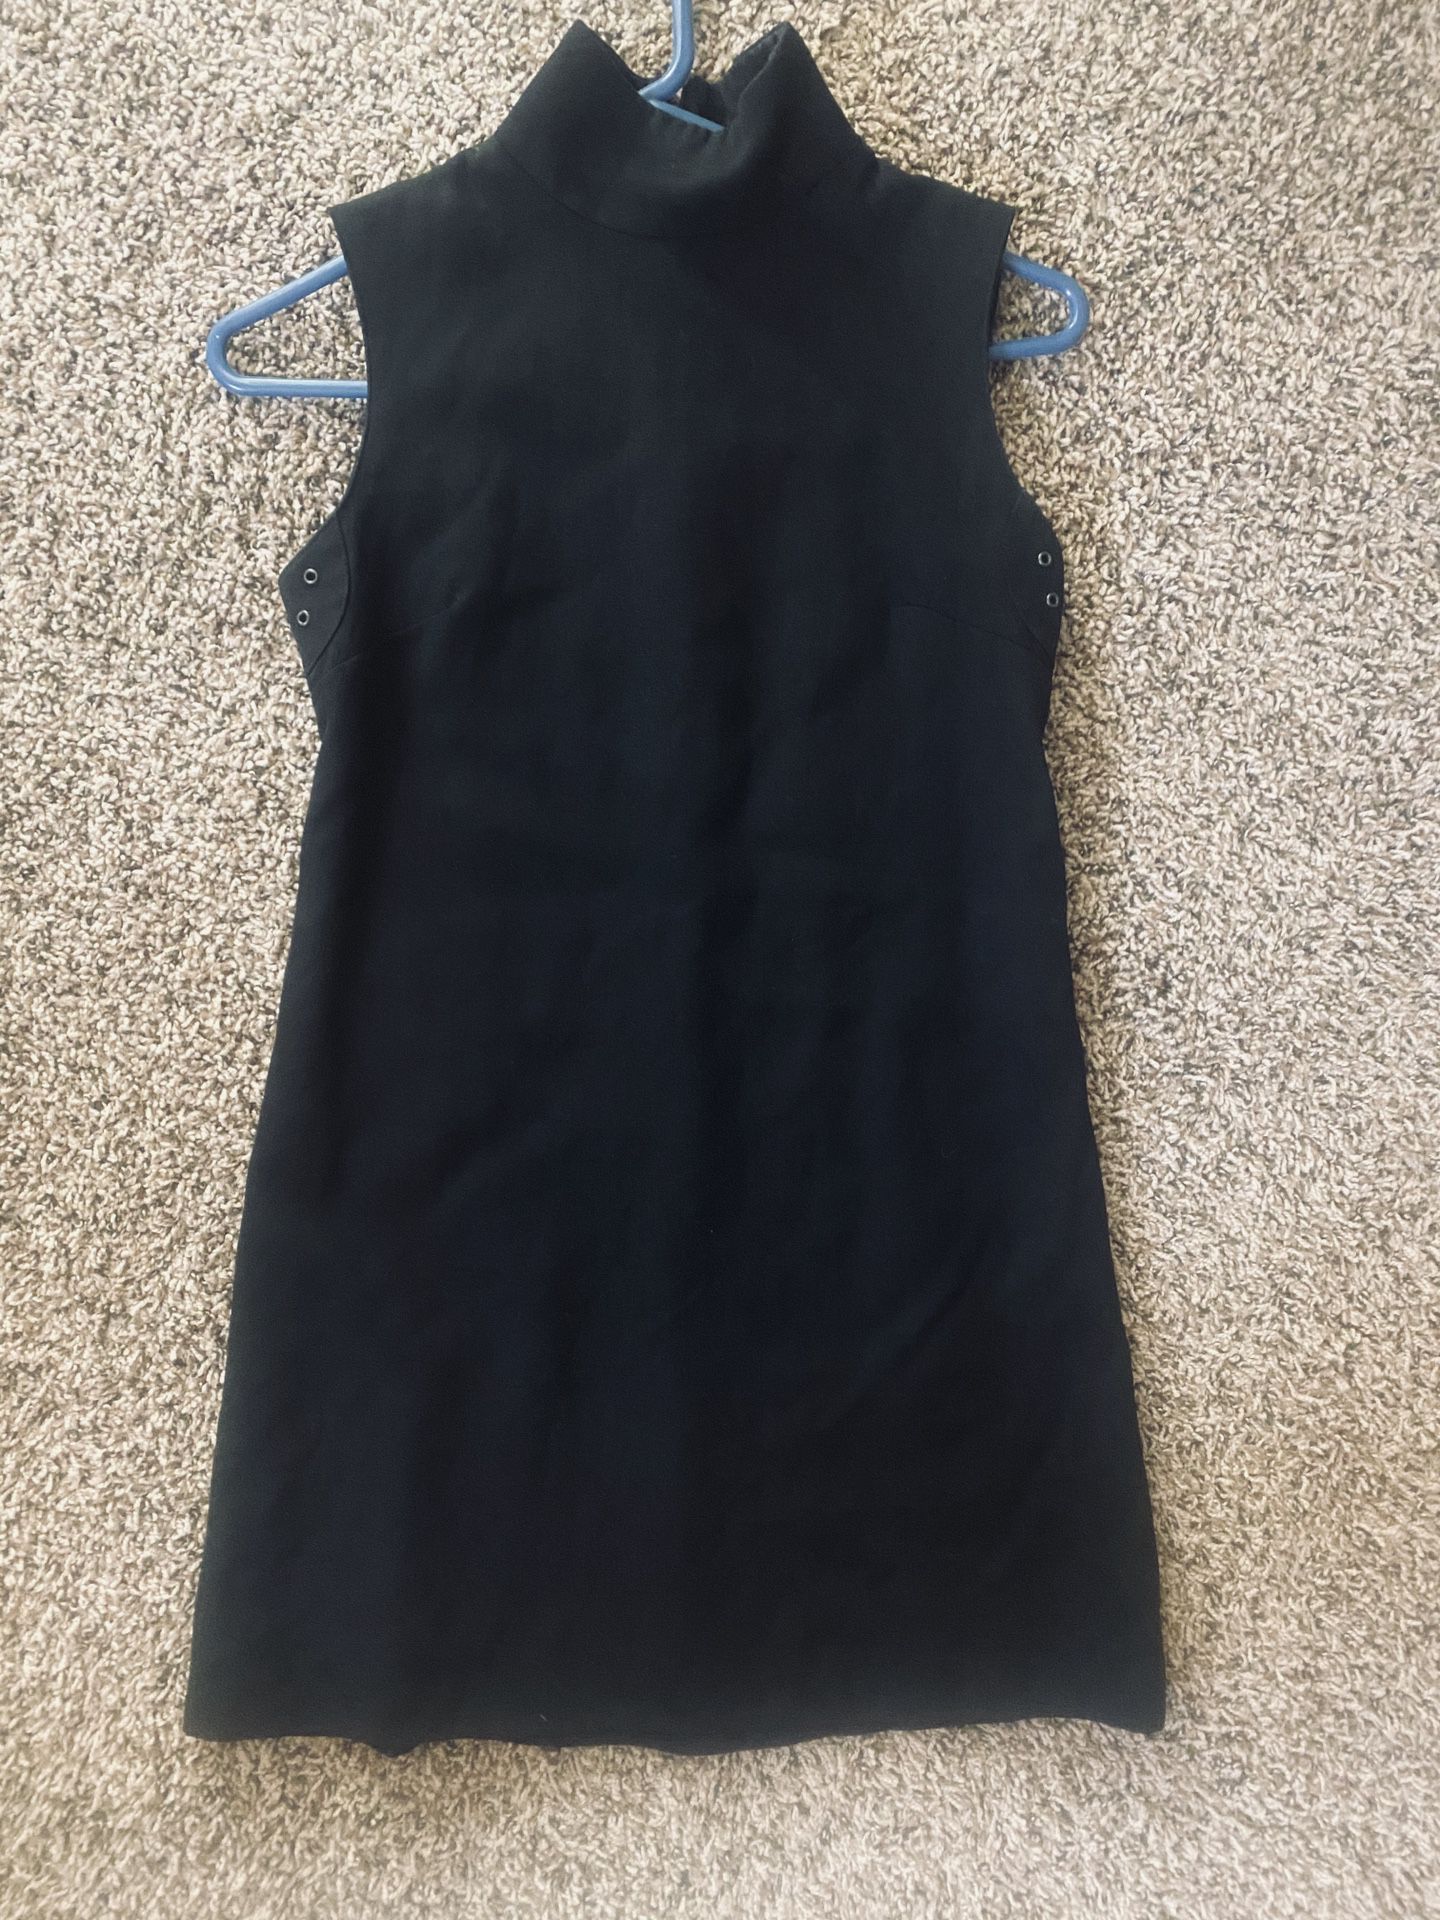 Burberry dress in excellent condition